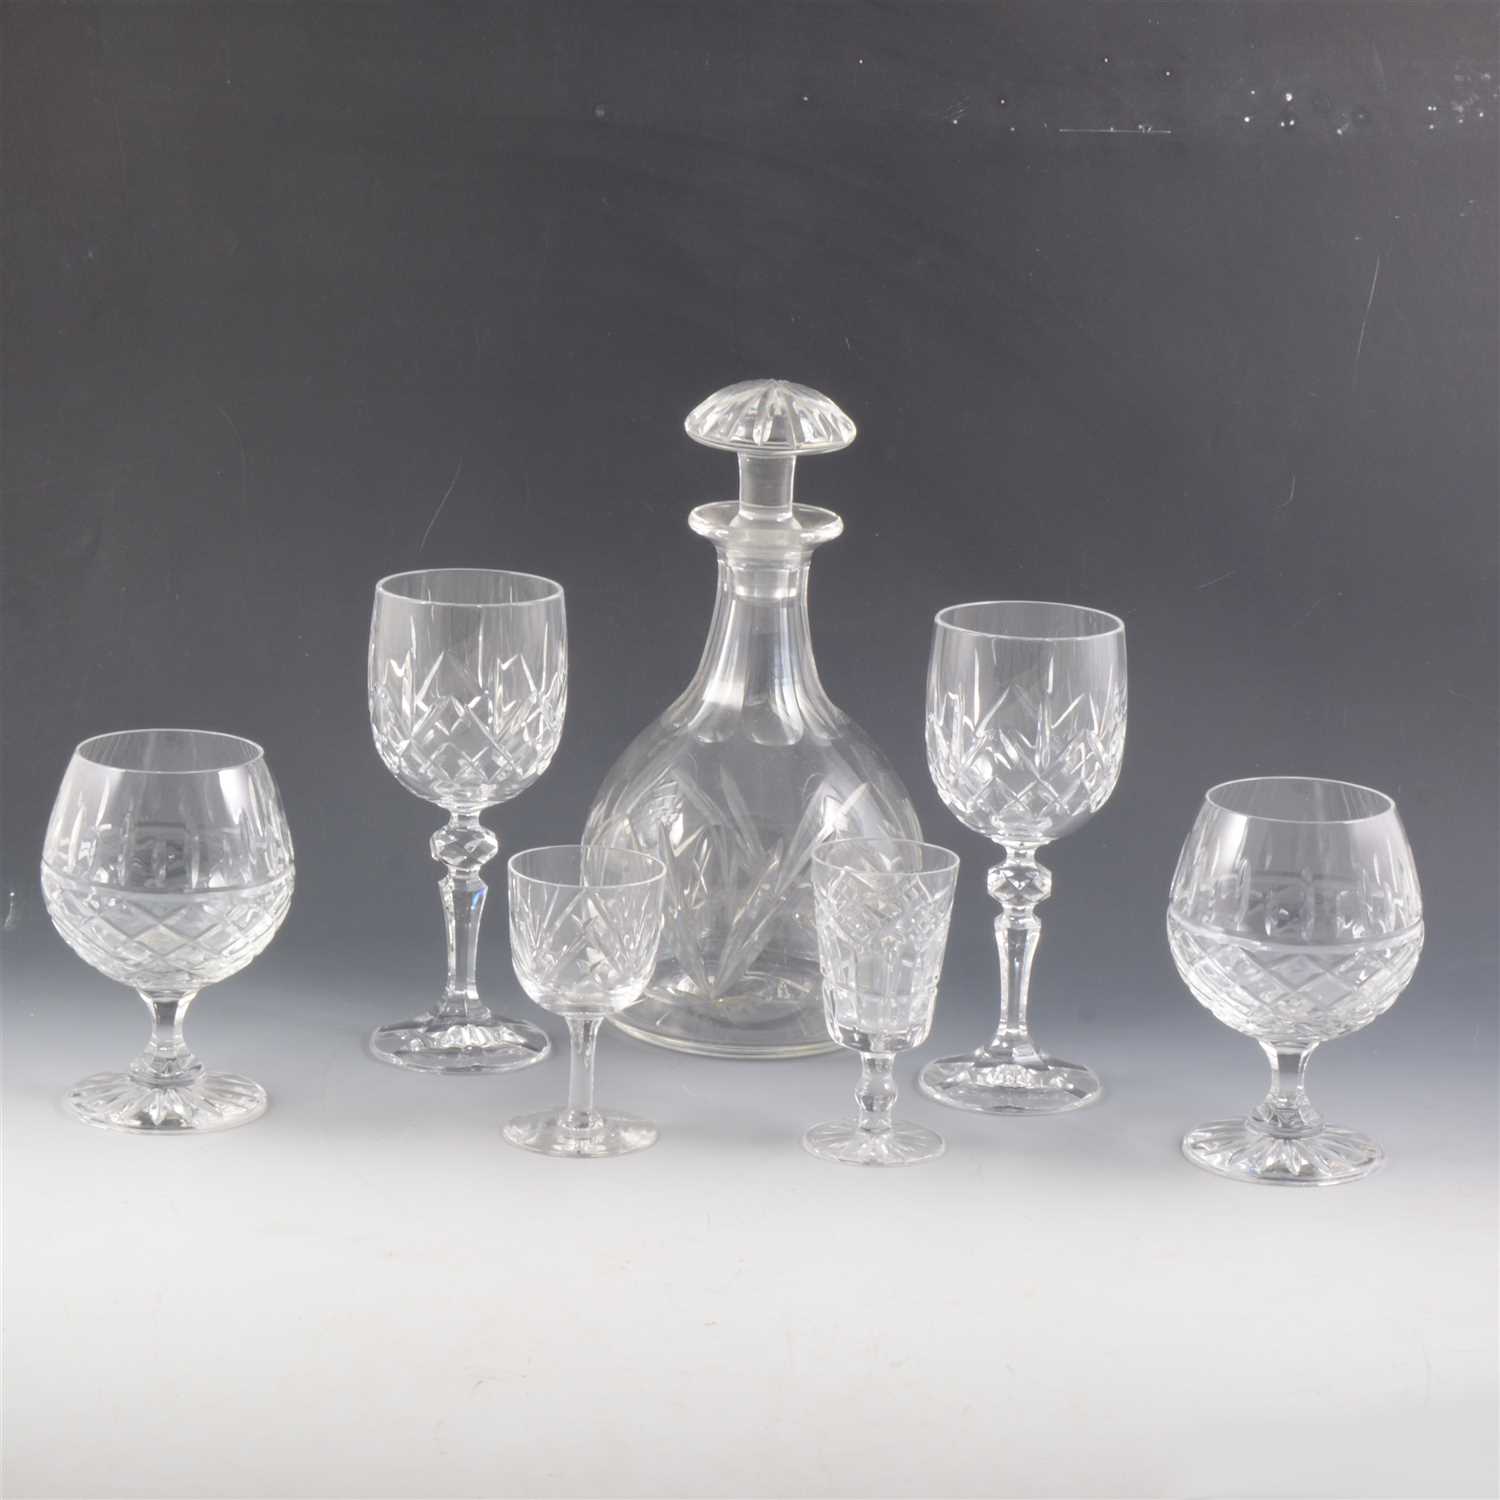 Lot 56 - Pair of mallet-shape cut glass decanters, and other glassware